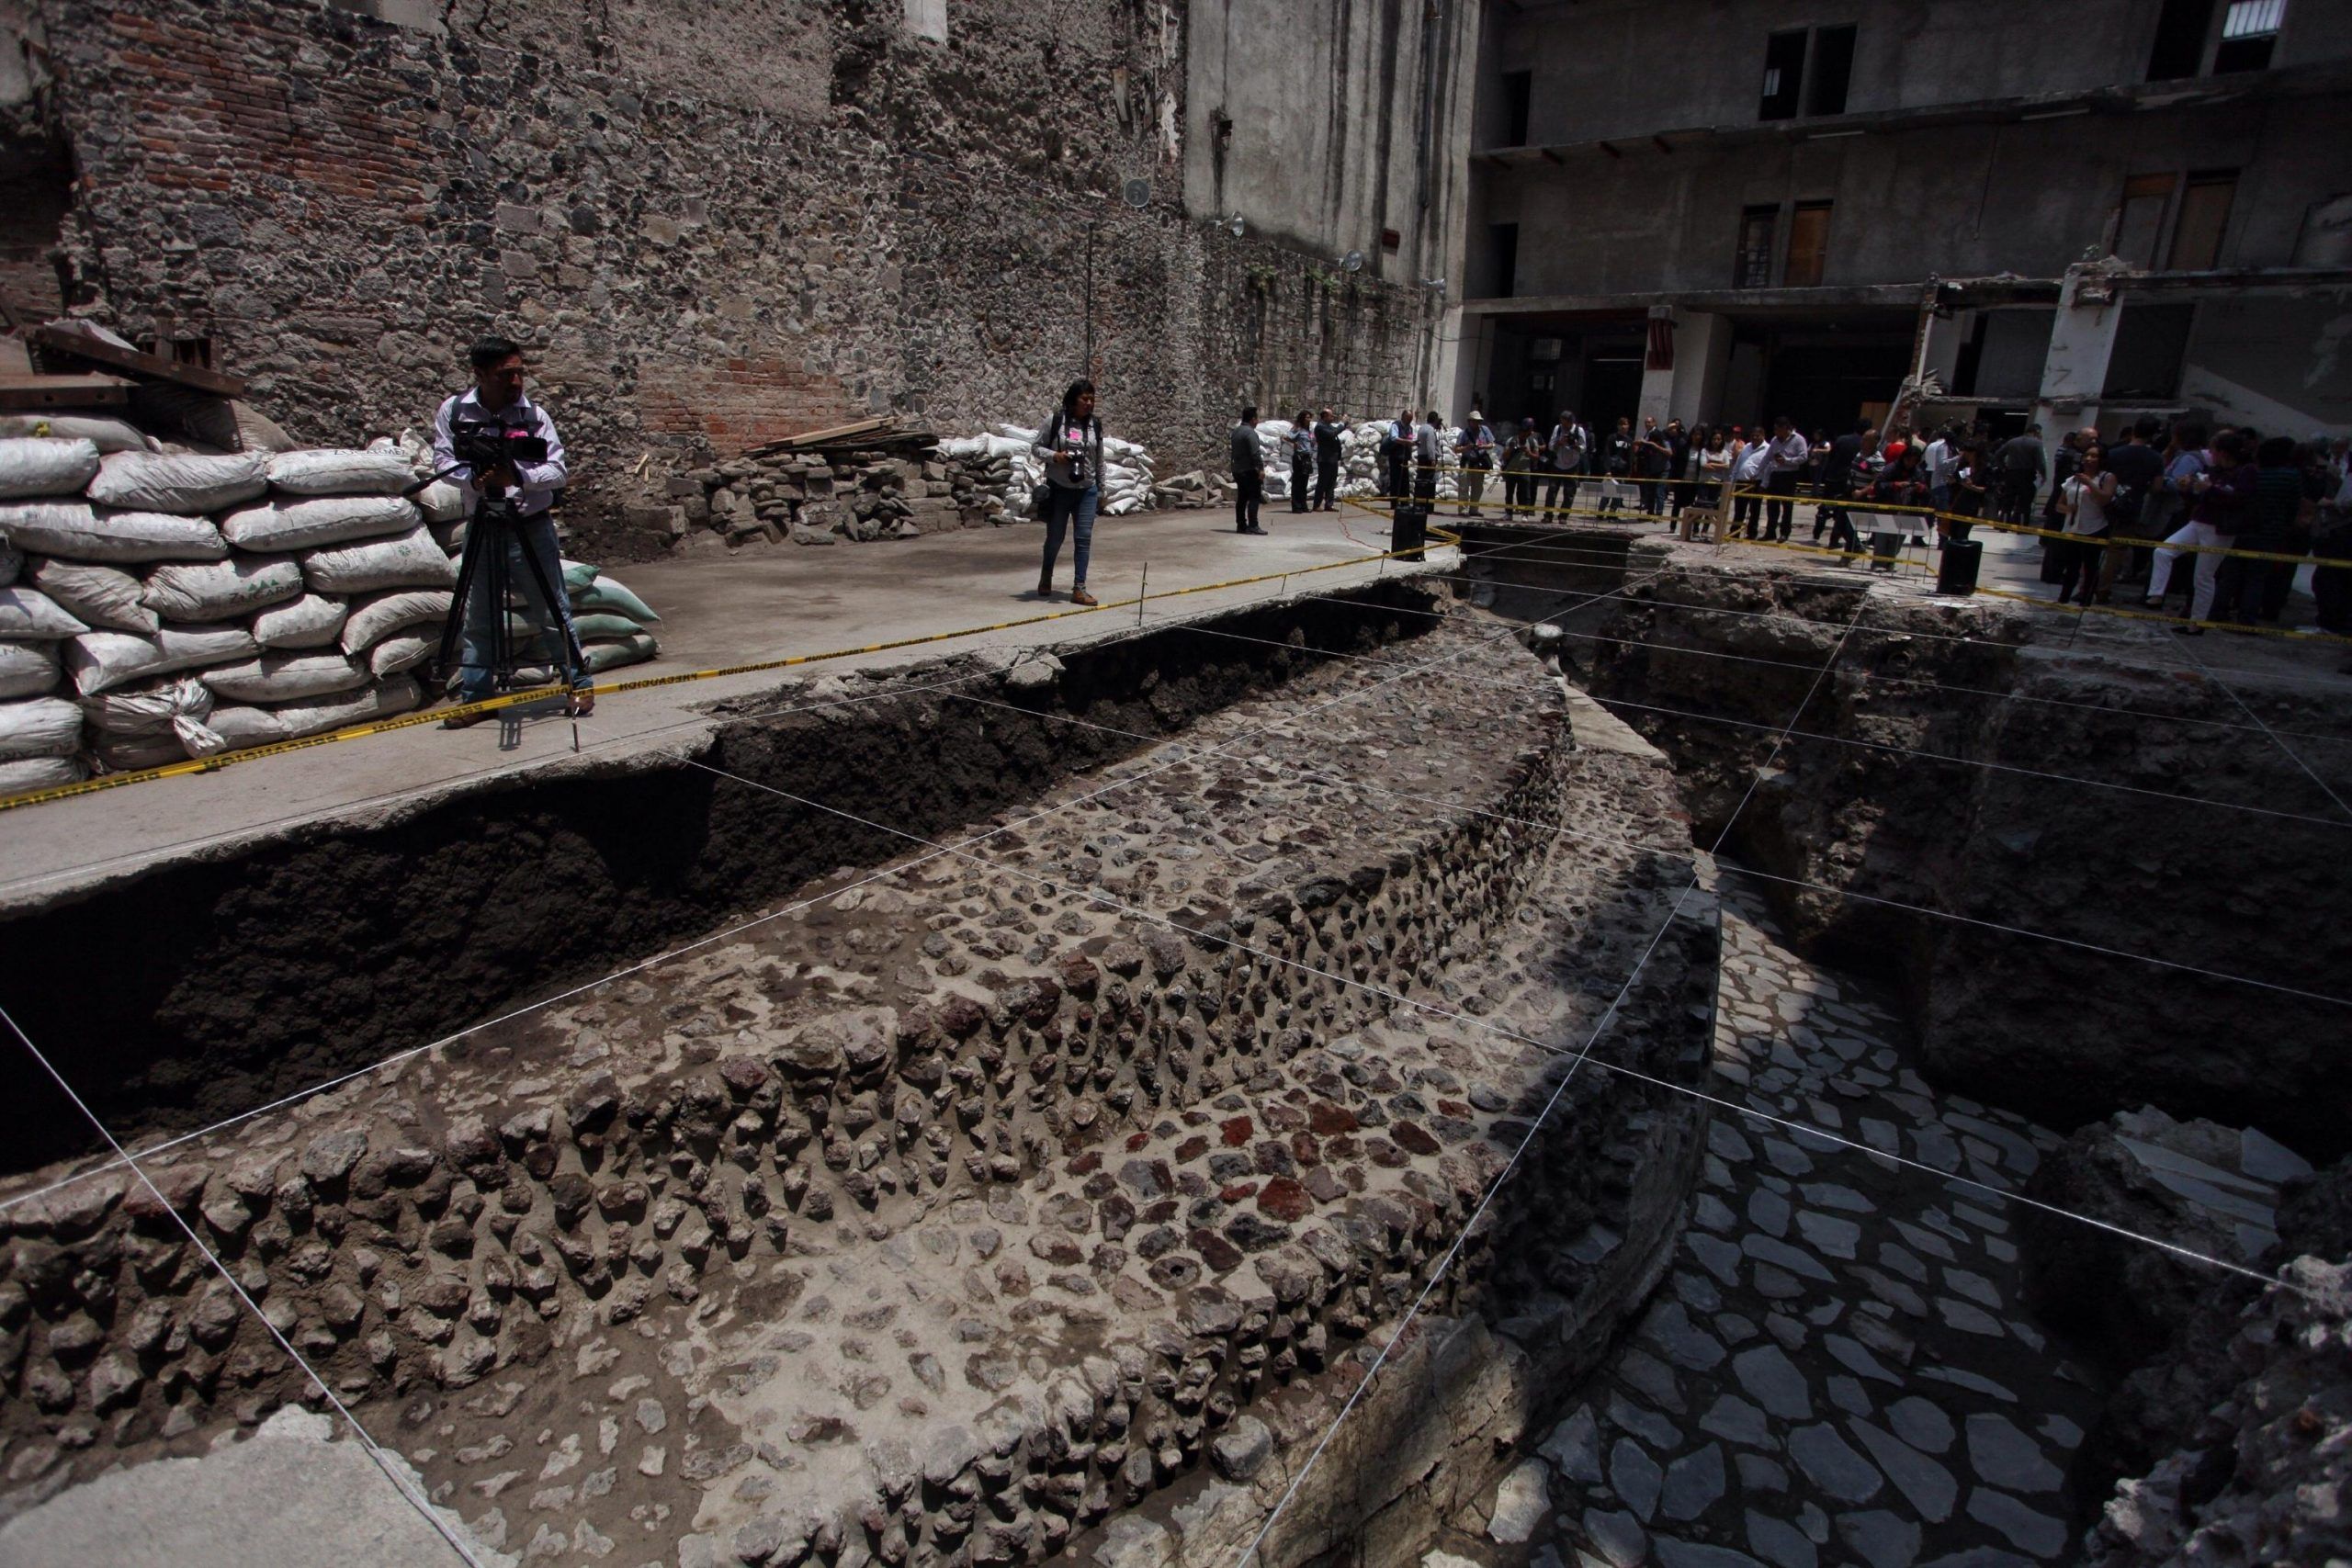 Mexico's INAH presents two new findings at the ancient city of Mexico Tenochtitlan